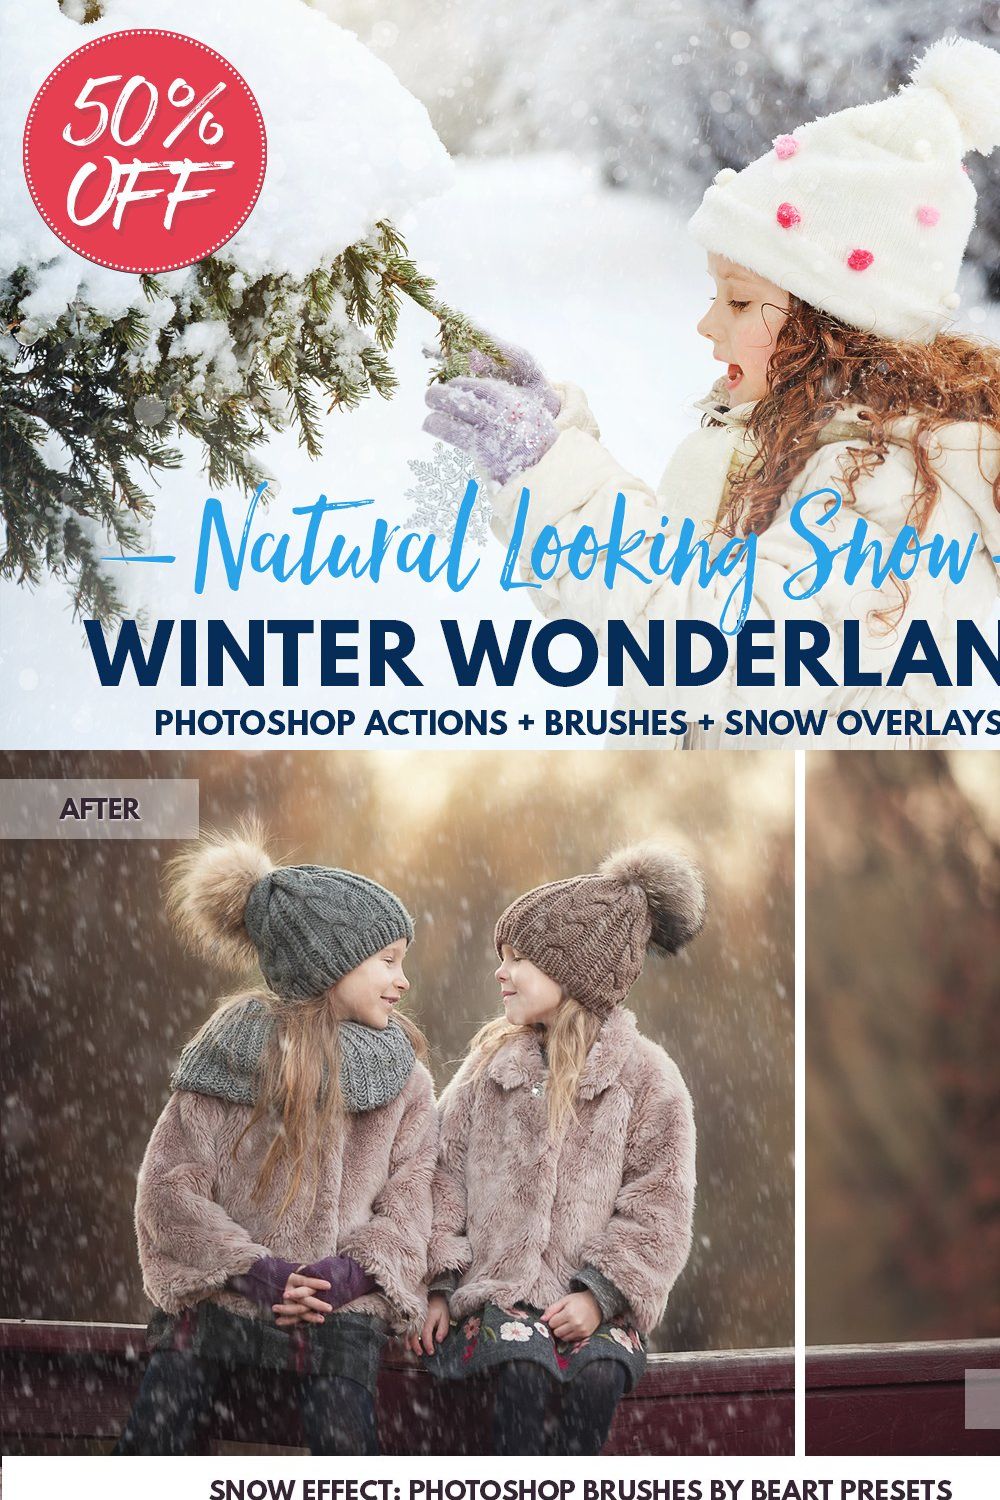 Snow Photoshop actions overlay brush pinterest preview image.